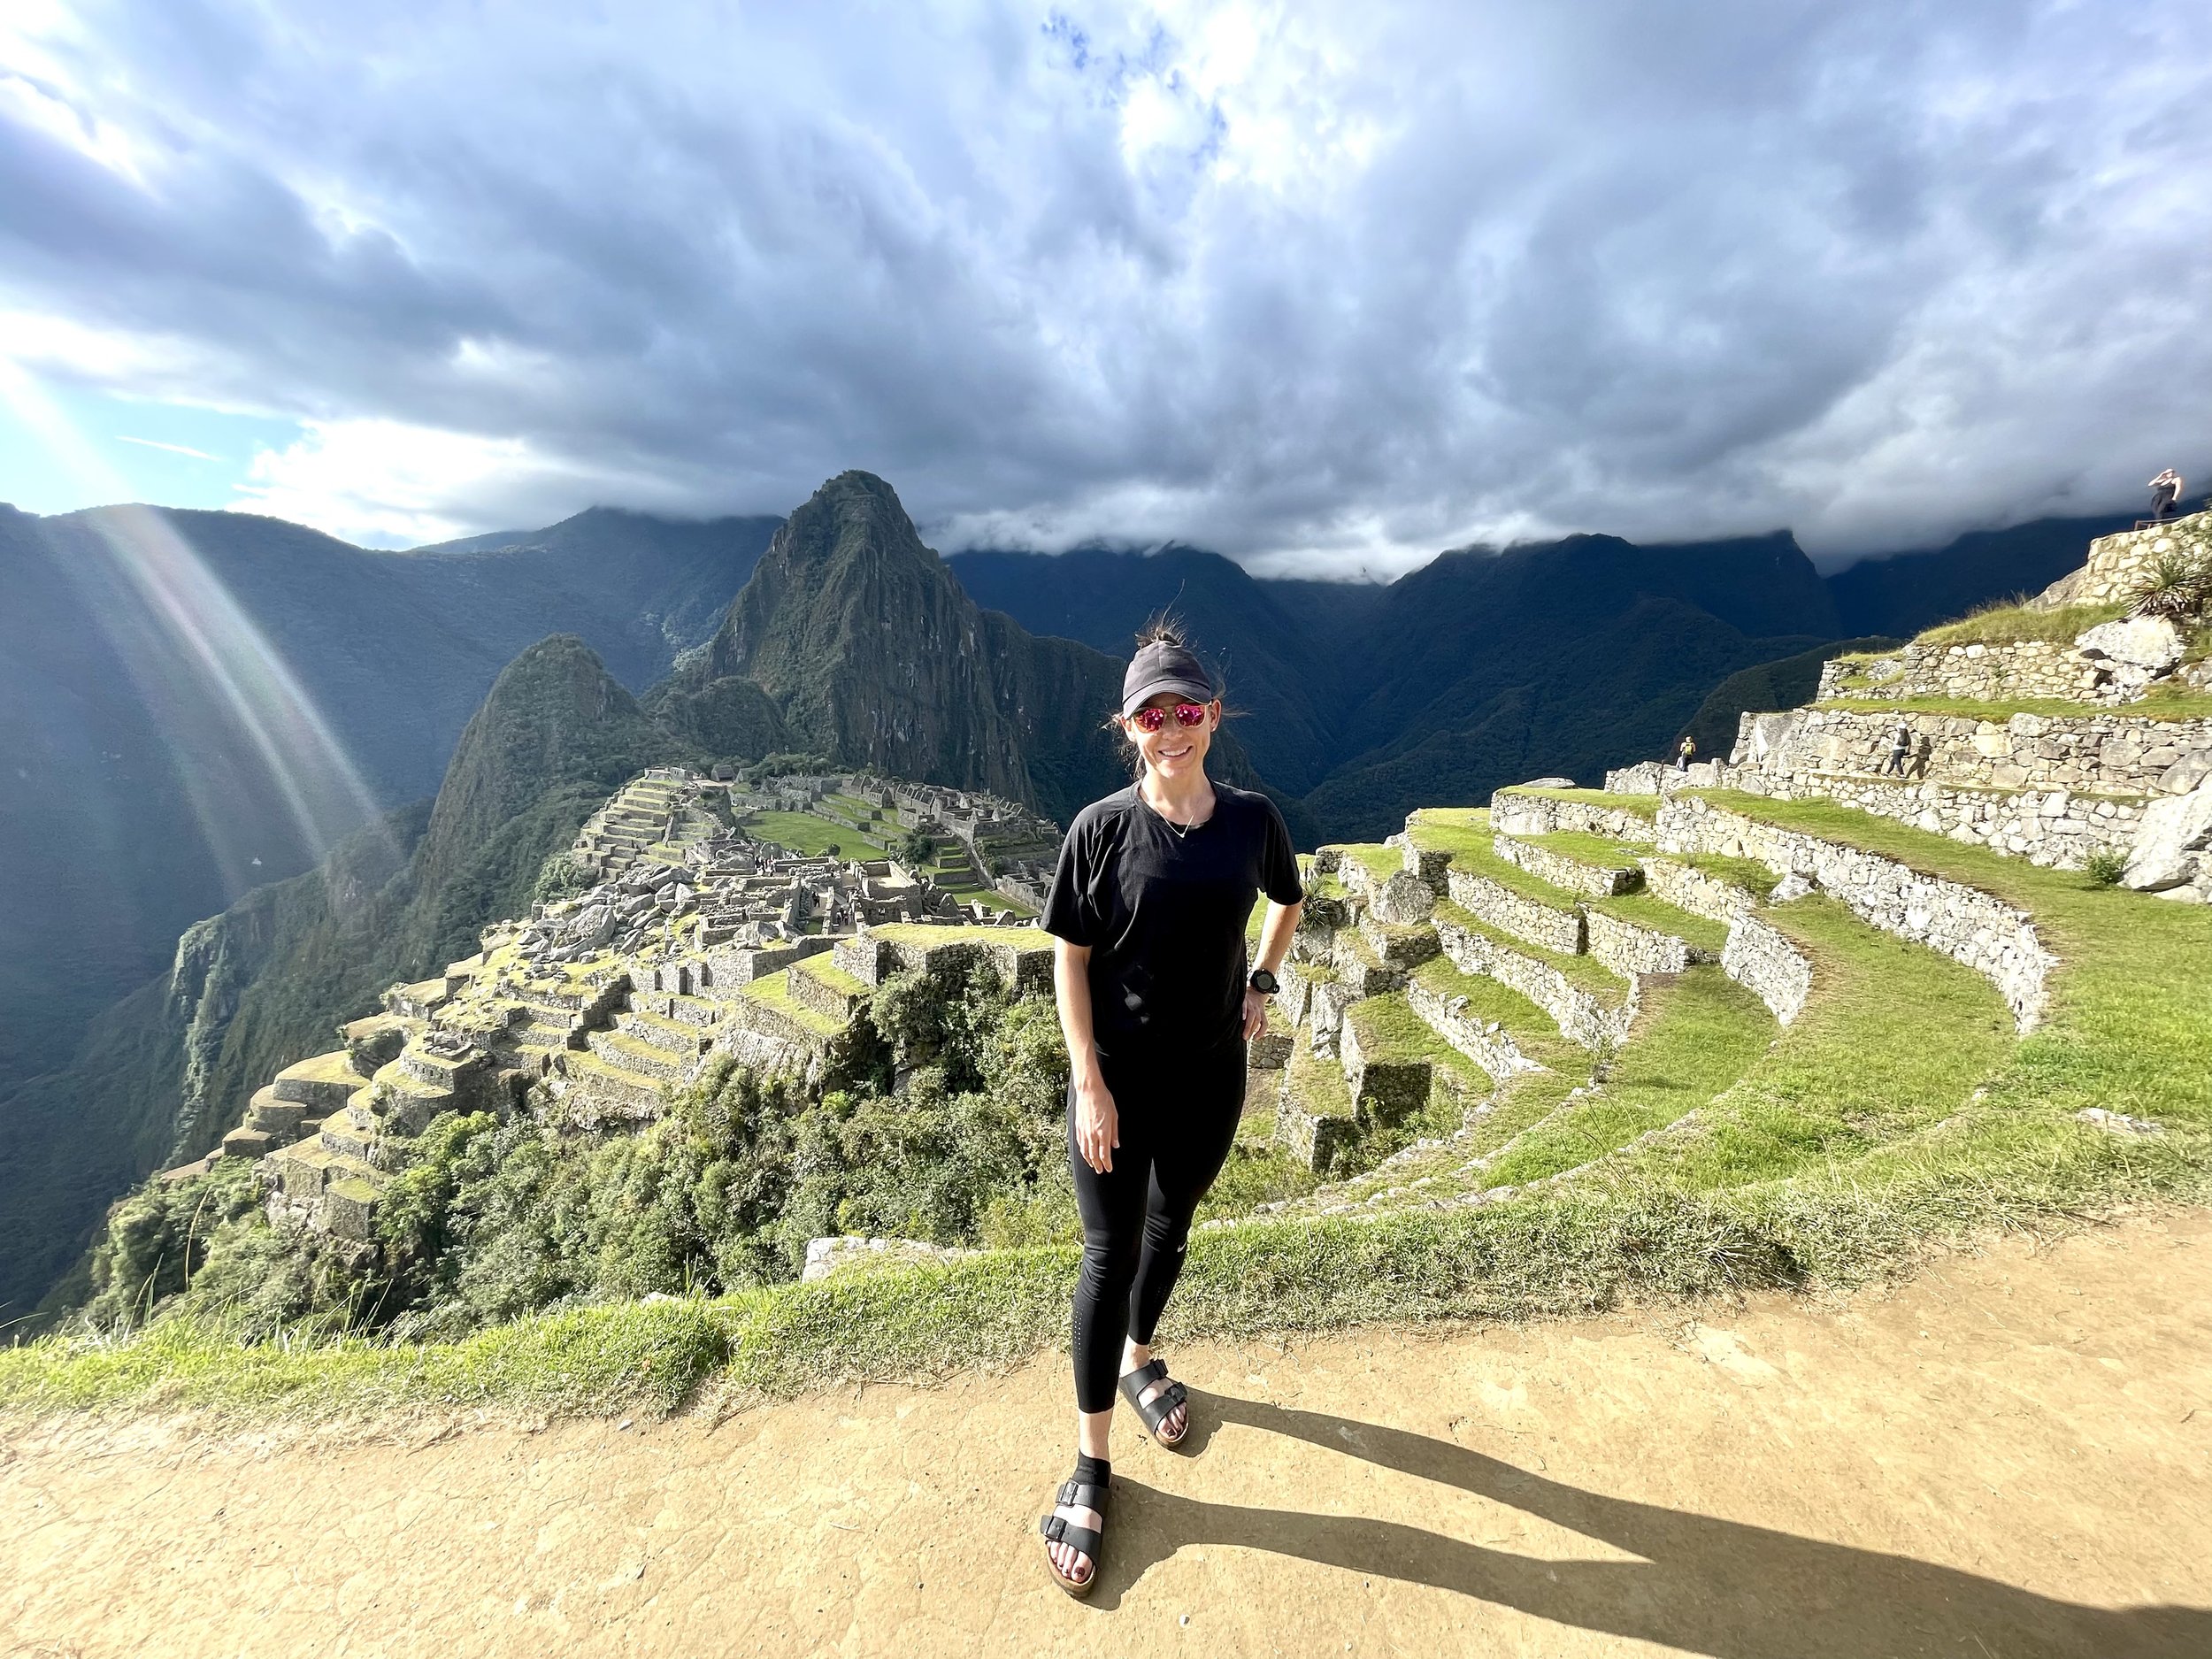   Name:  Jessica   Hometown:  New York, NY, US   Which Runcation did you attend:  Peru   What is your profession:  Nurse Practicioner   How long have you been running?:  25 years.   Did you have experience running trails before the trip?:   Some, not